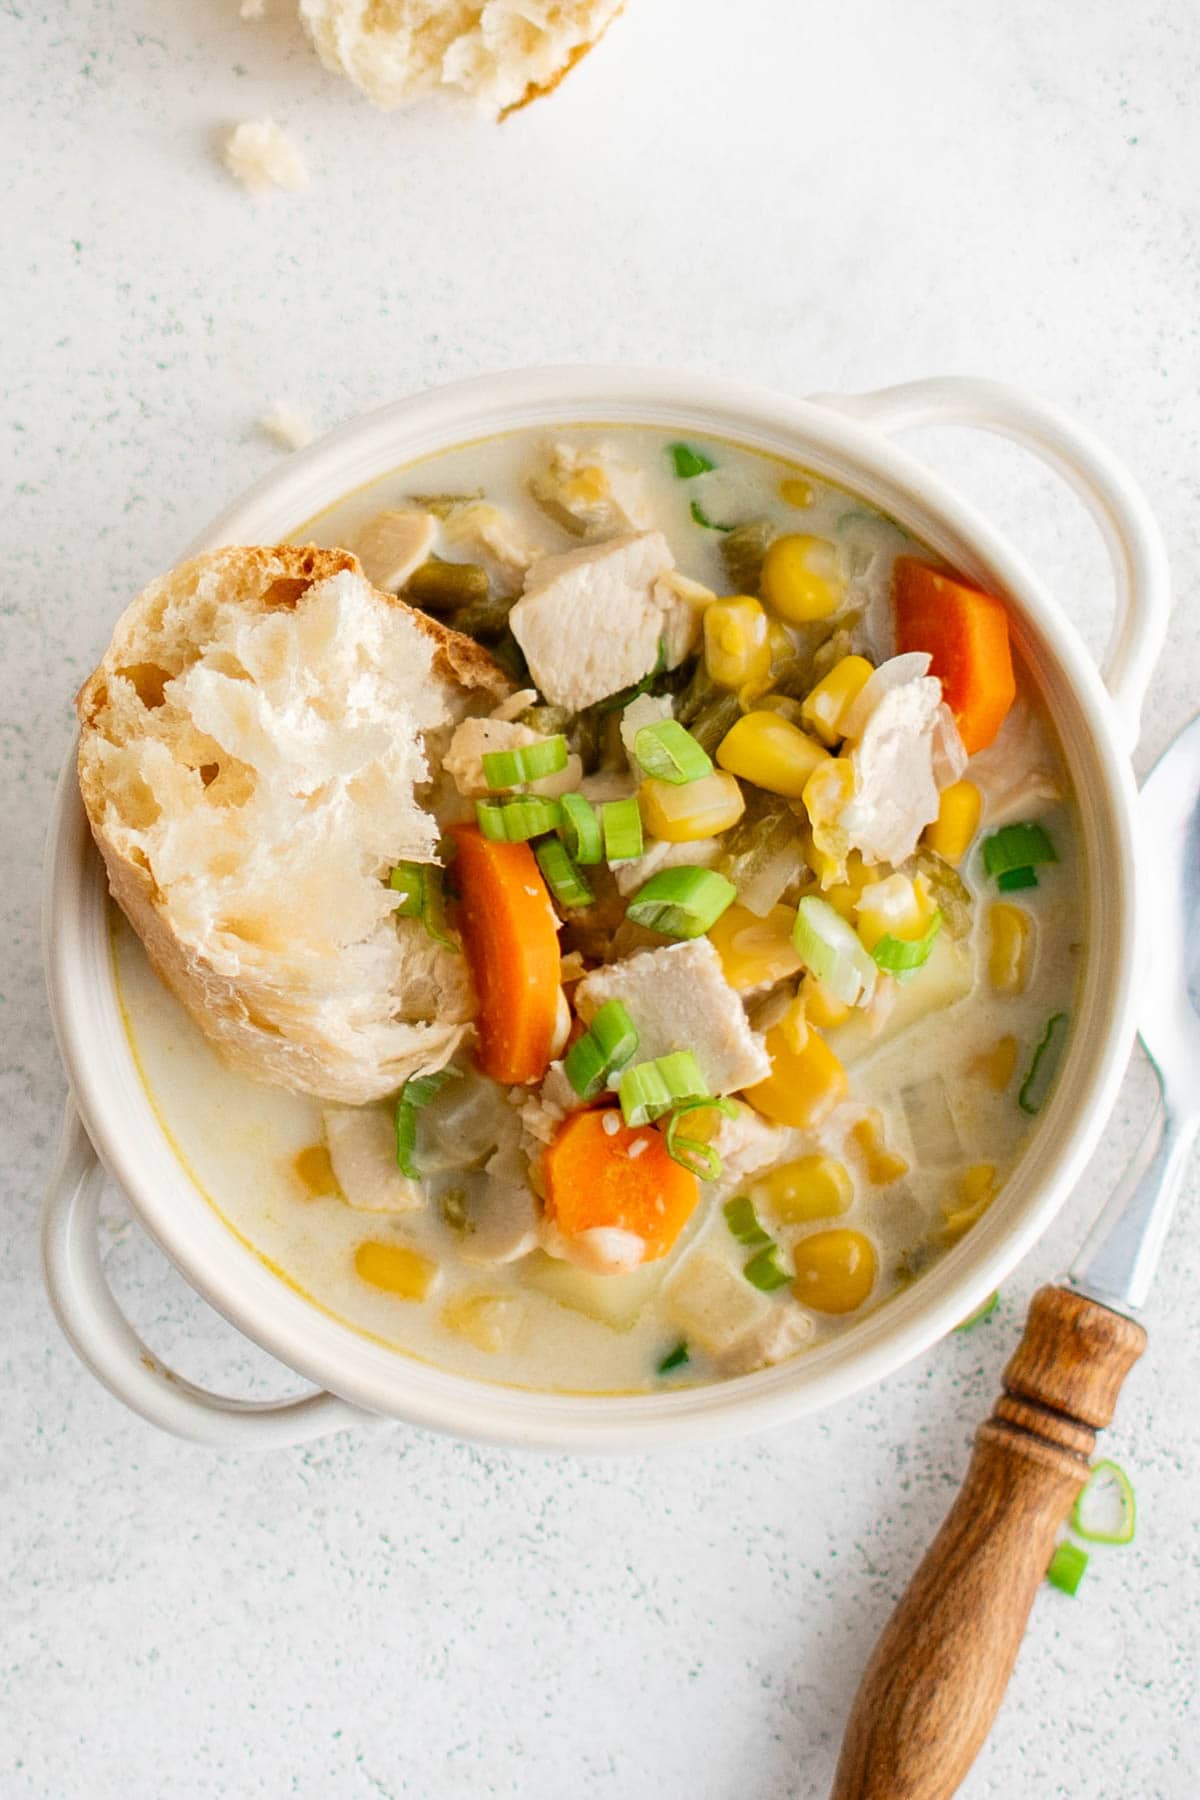 Bowl of creamy chicken soup with a pieces of bread.